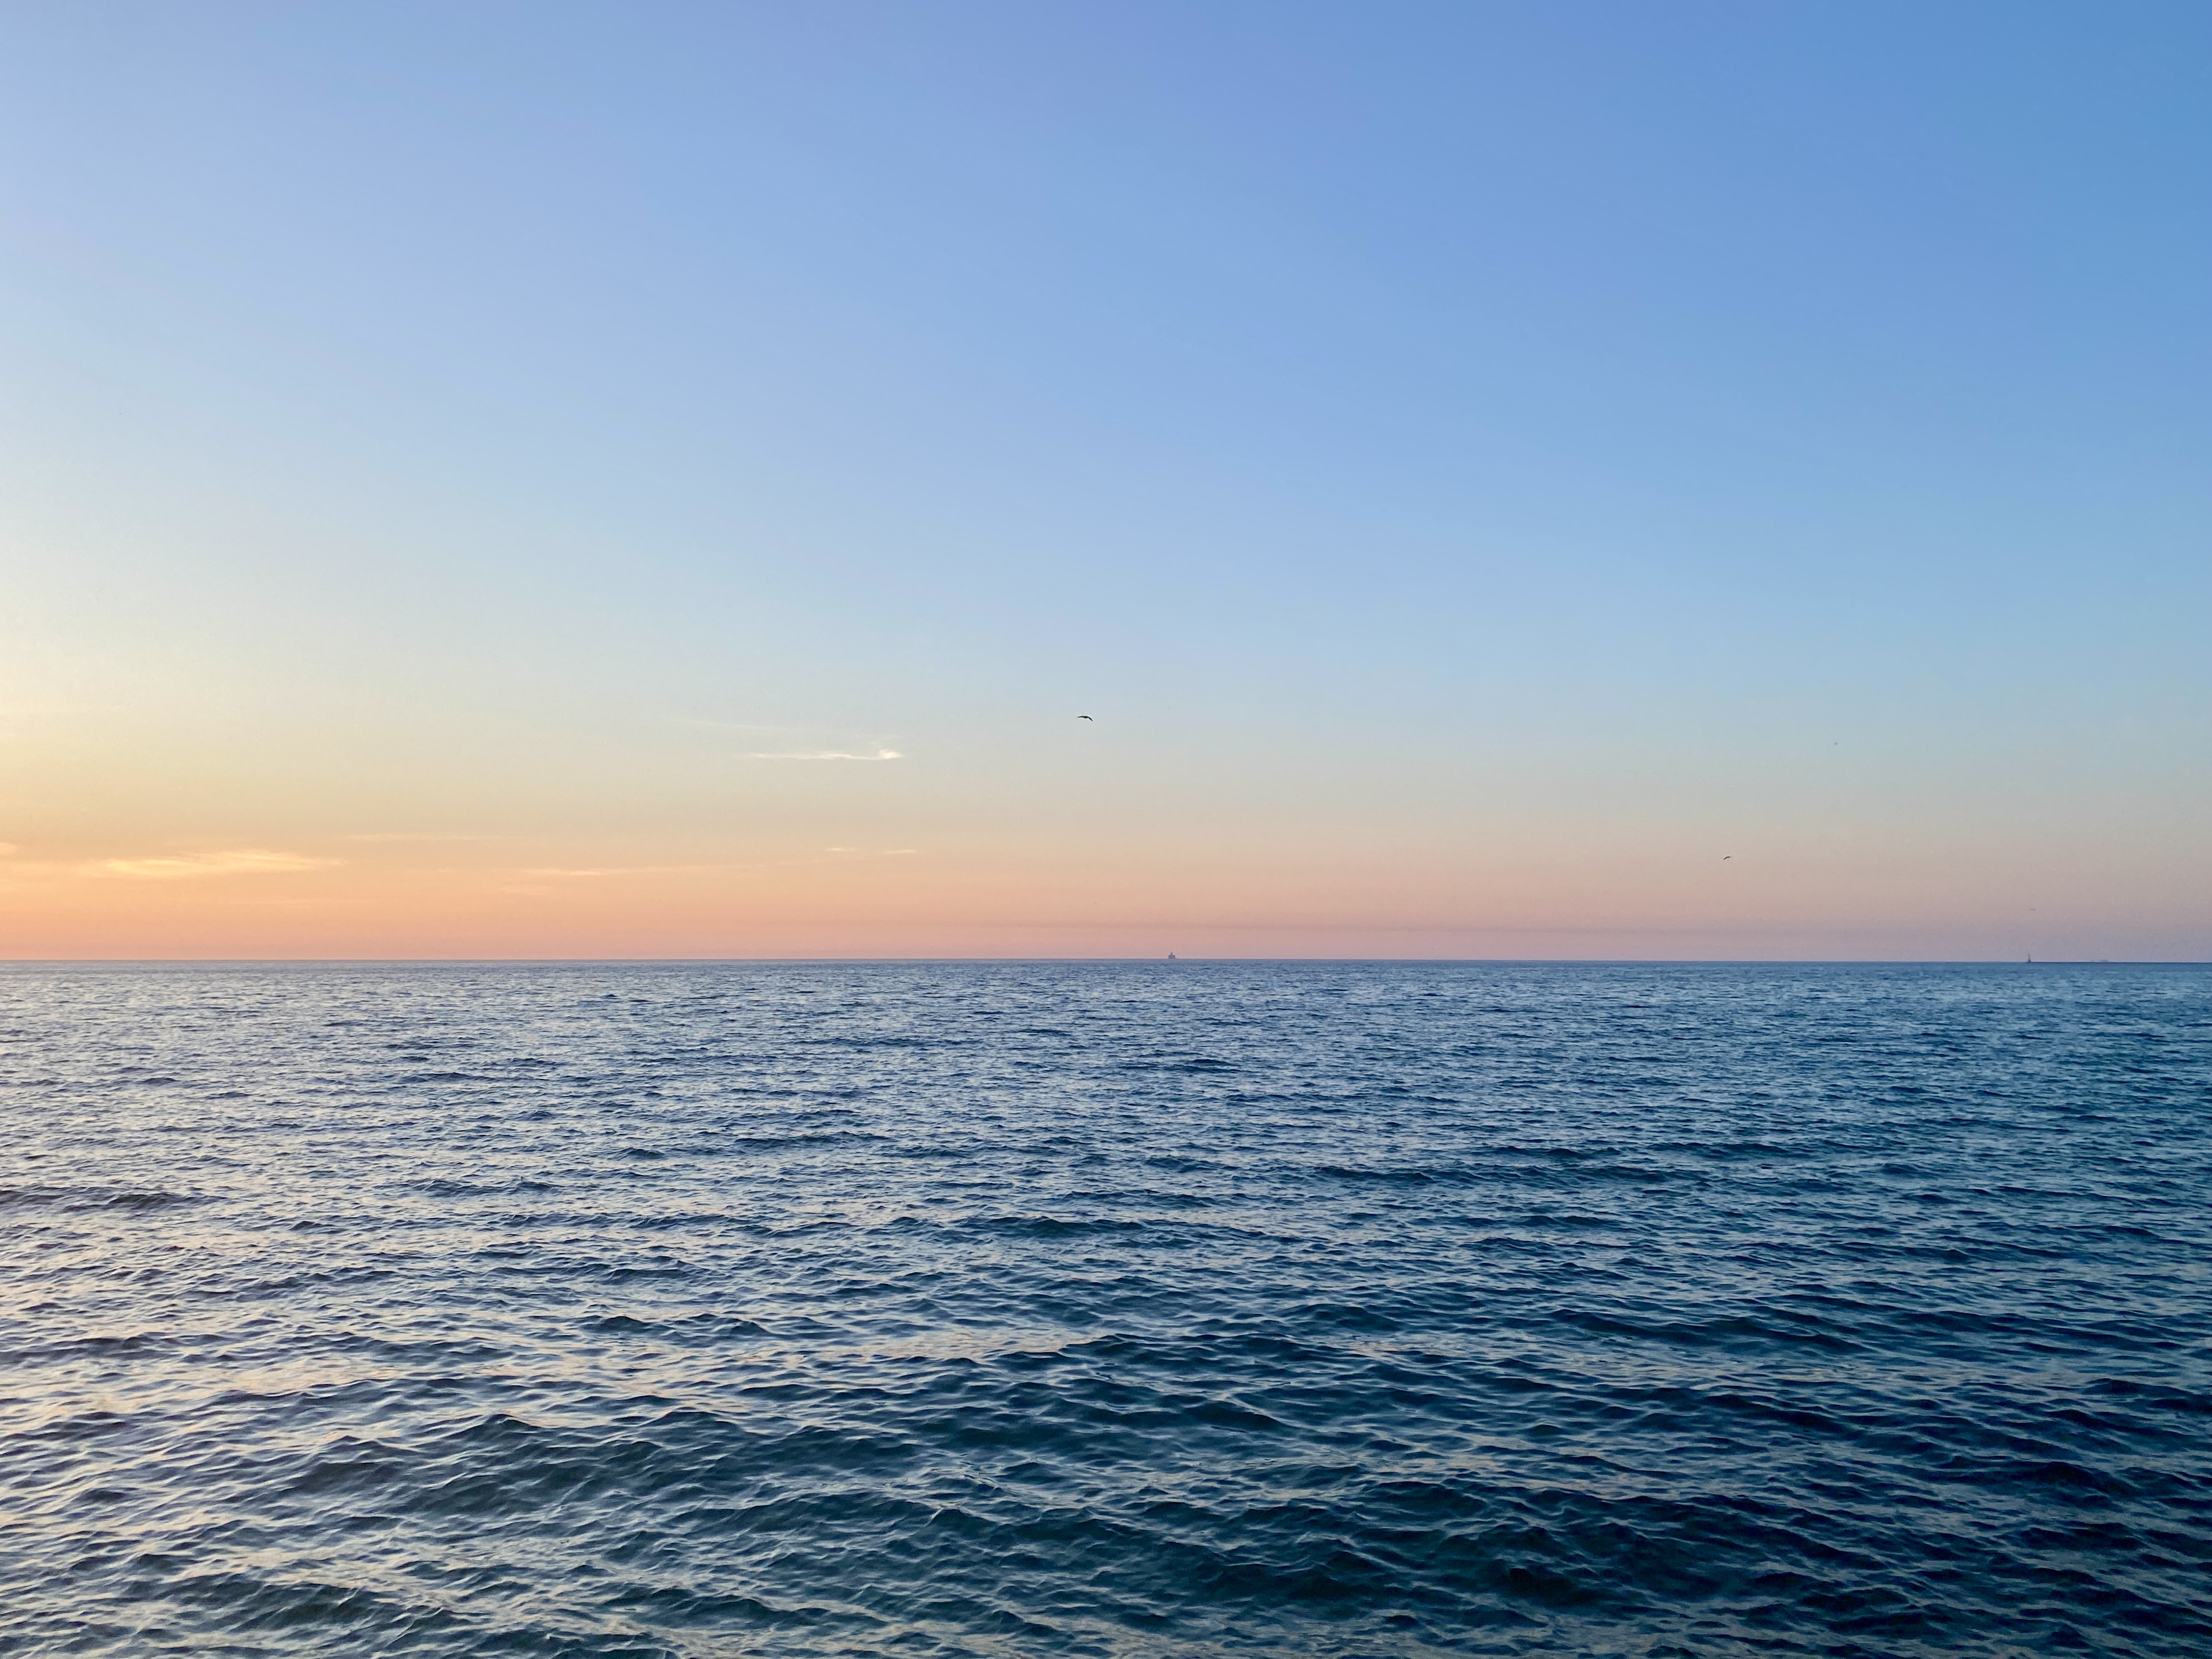 Horizon of large lake at sunrise, water shaded dark blue and sky fading from pink to deep blue above